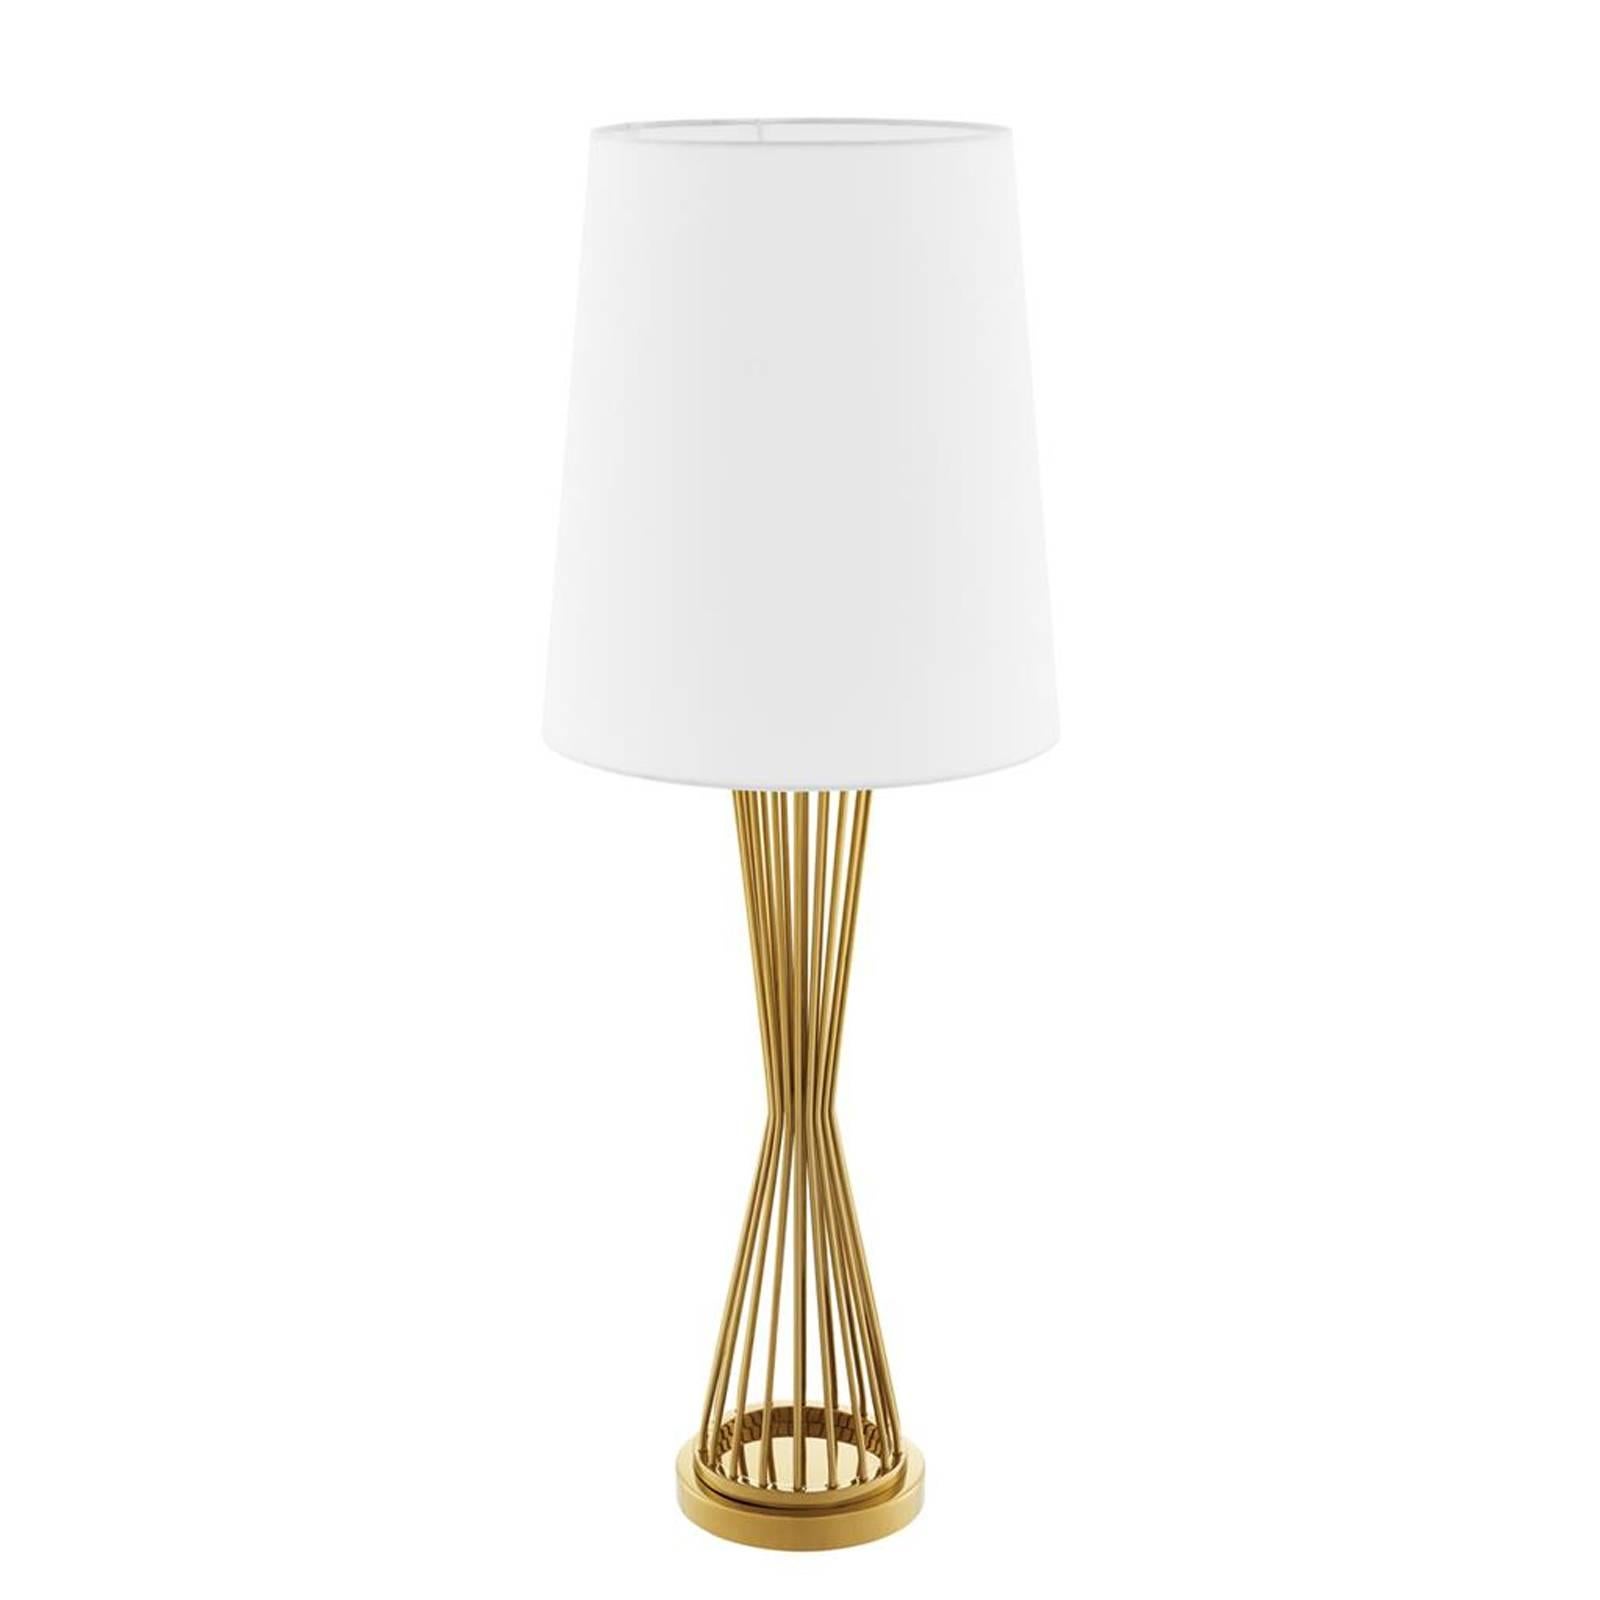 Chinese Barnet Table Lamp in Gold or Nickel Finish For Sale